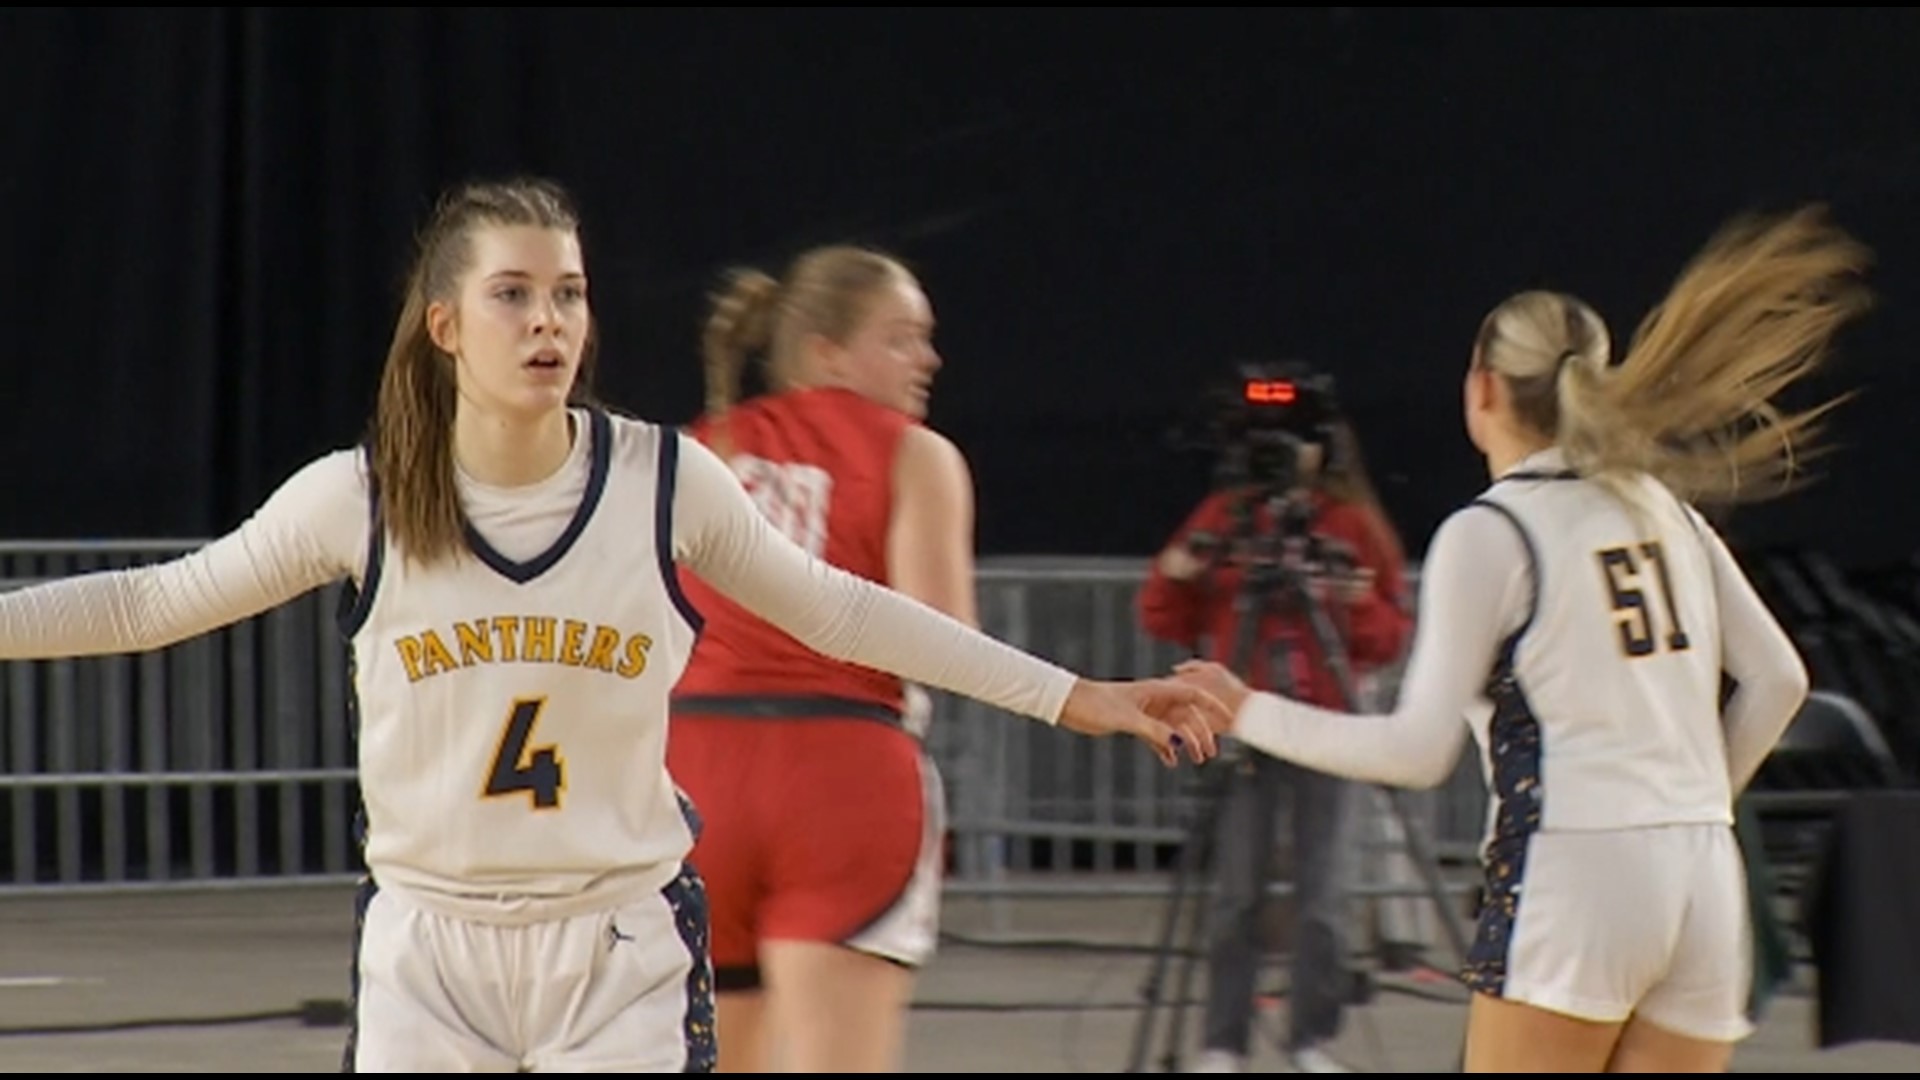 Highlights of the Mead girls 56-50 win over Snohomish in the 3A State Semifinals